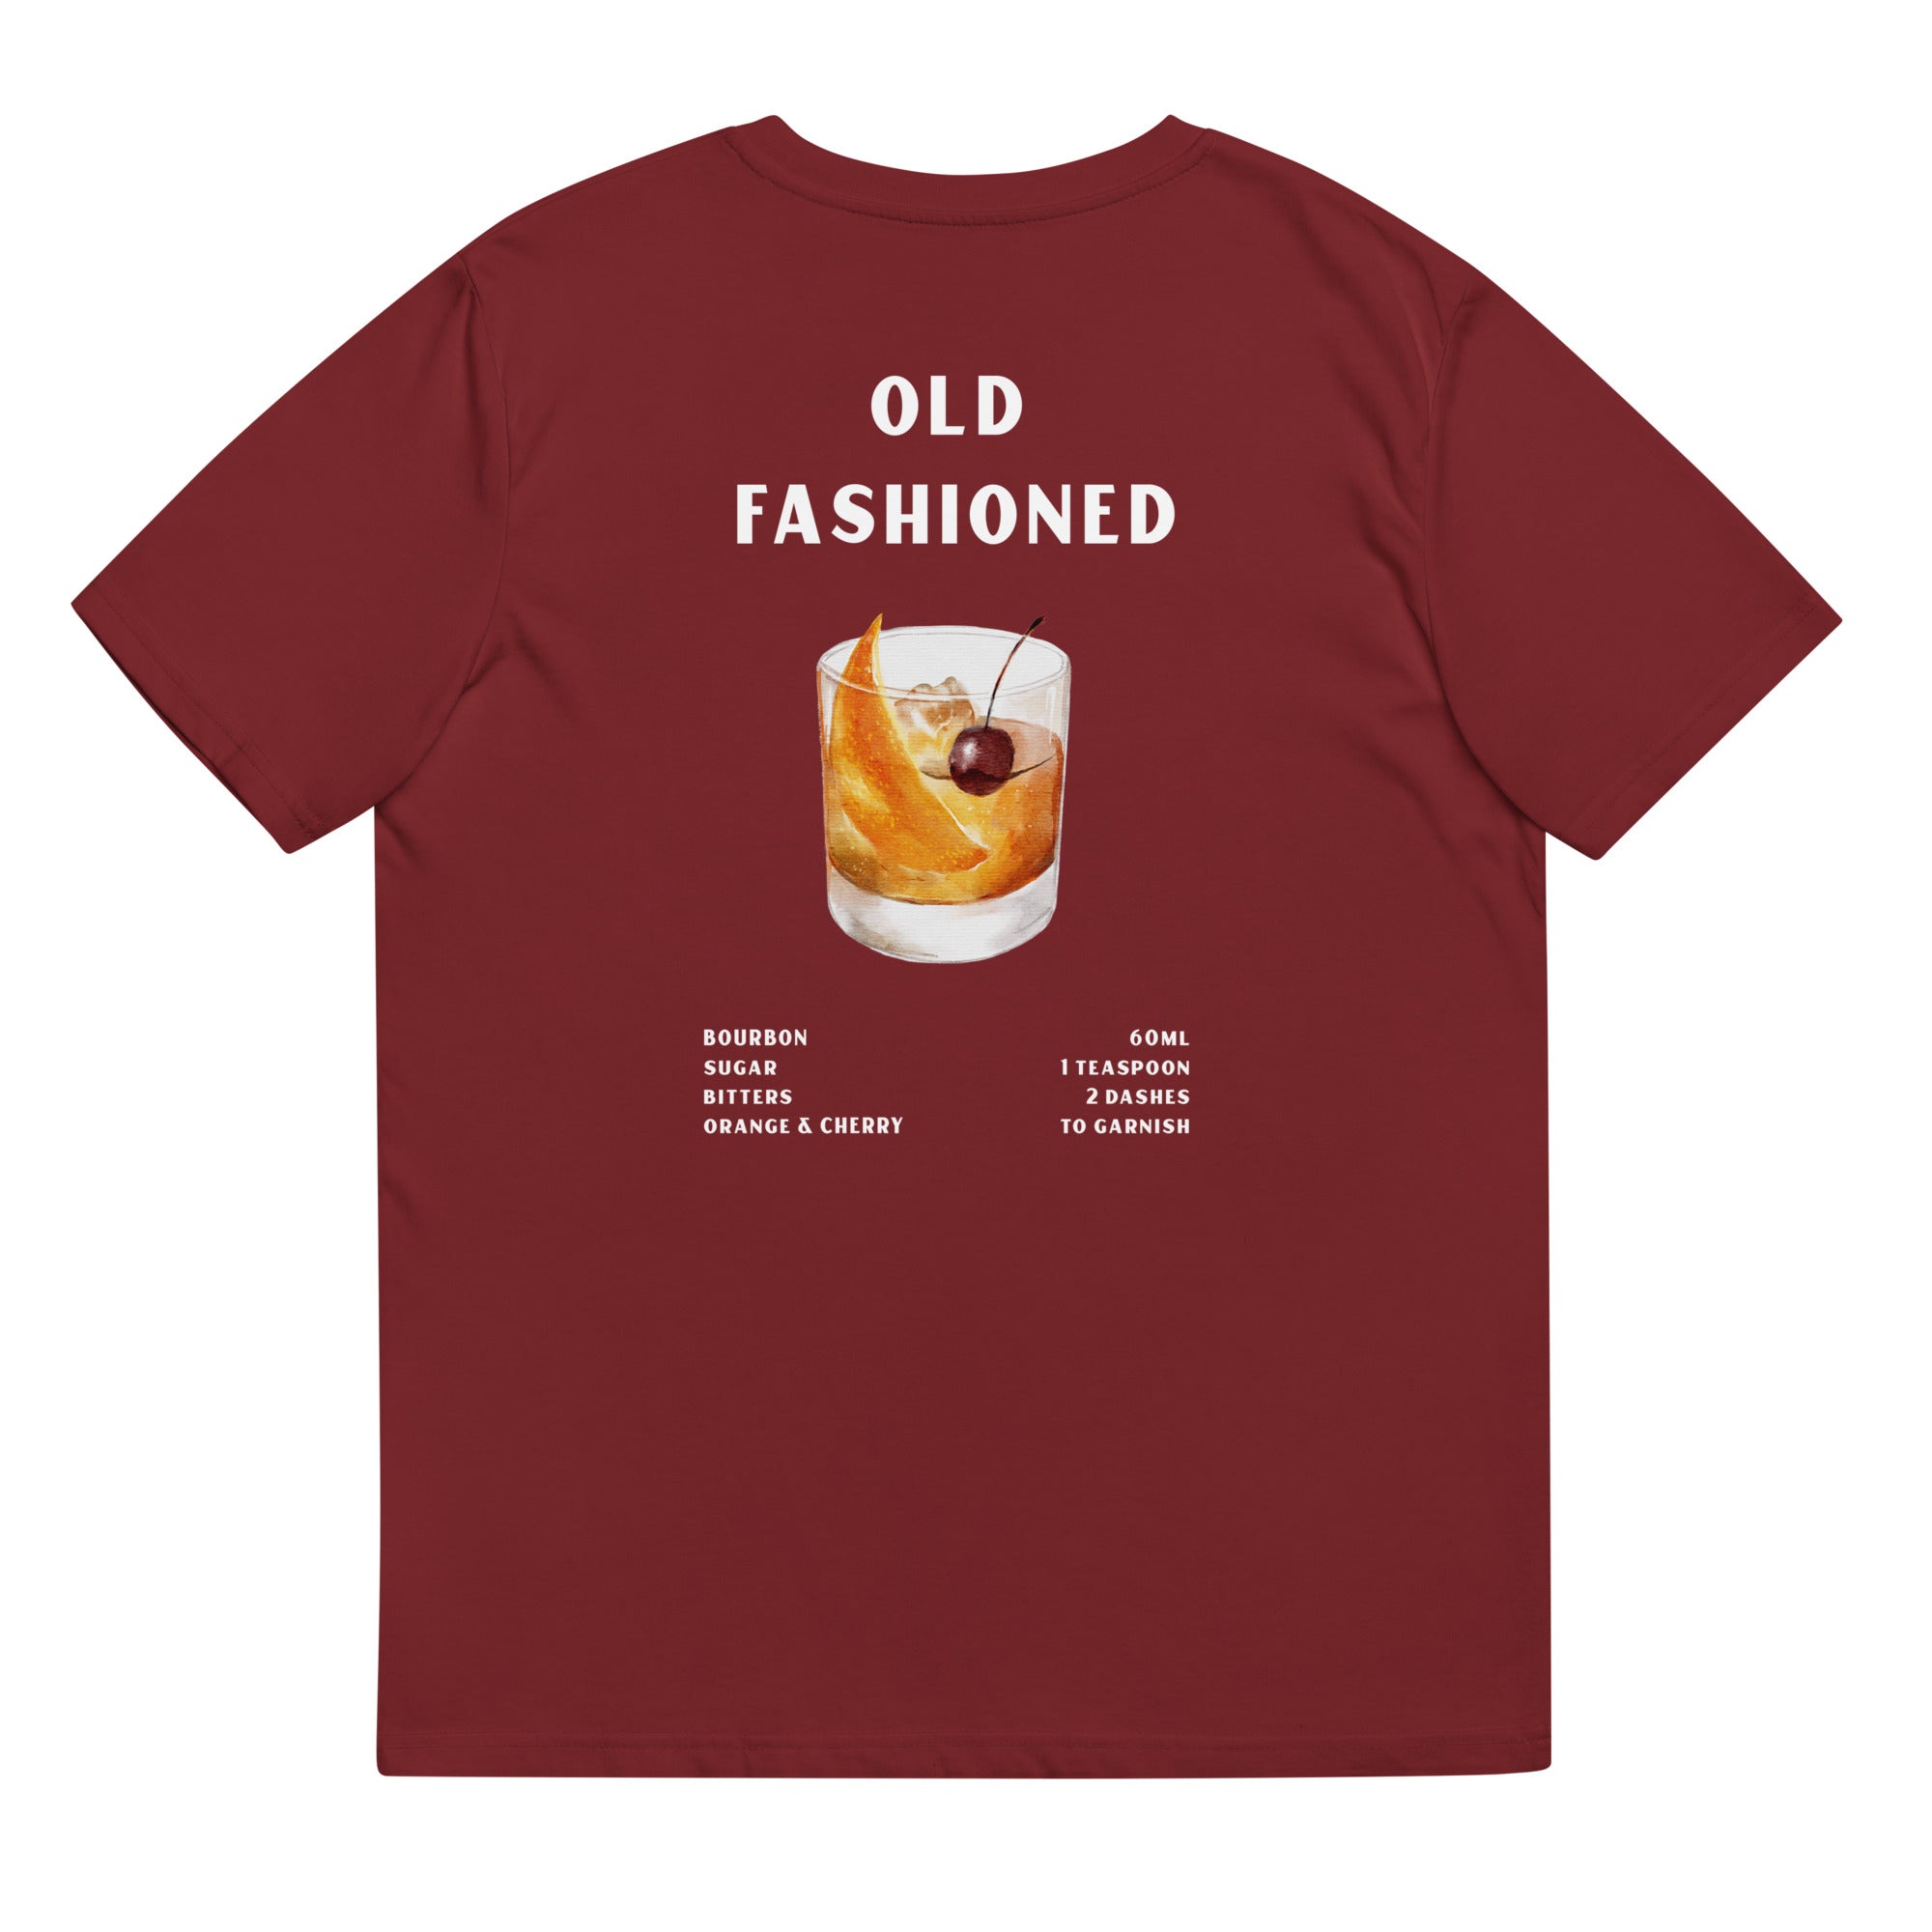 Old Fashioned - Organic T-shirt - The Refined Spirit